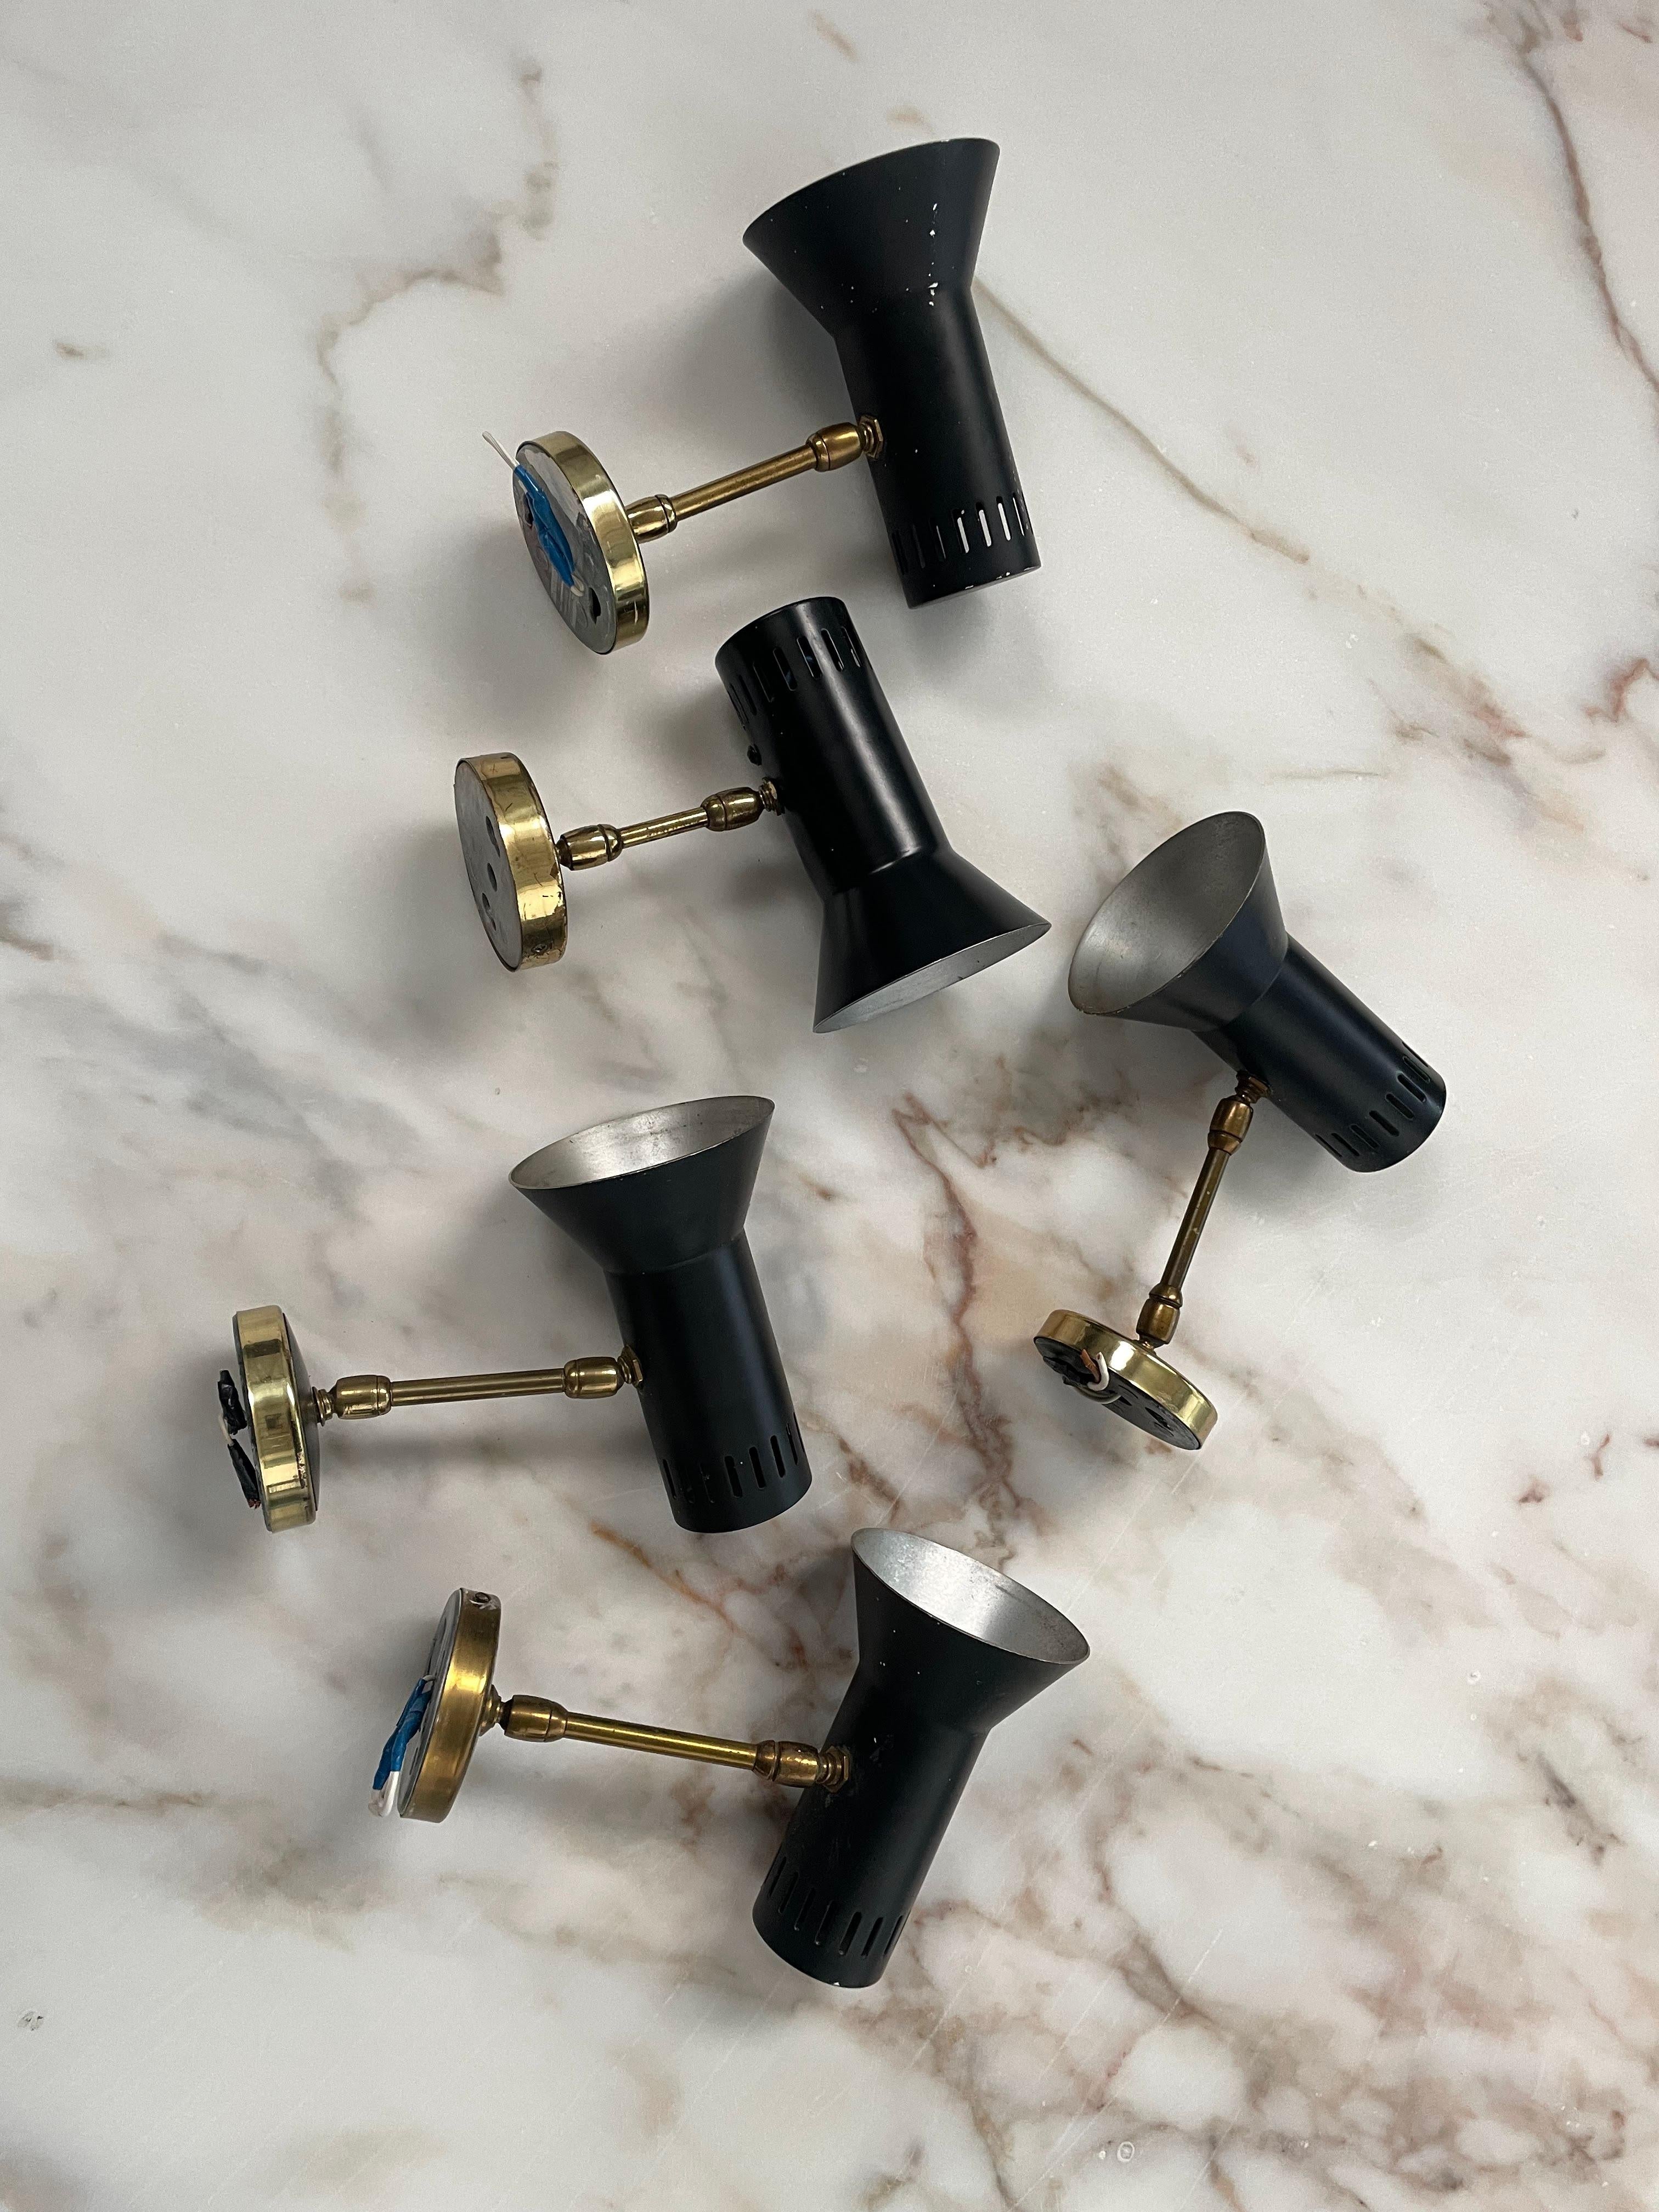 Group of 5 1950s spotlights attributed to Stilnovo.
The spotlights are adjustable and have a black painted metal frame with brass arm and details.

The height of these spotlights varies from 18 to 22 cm. (You can see the difference in height between